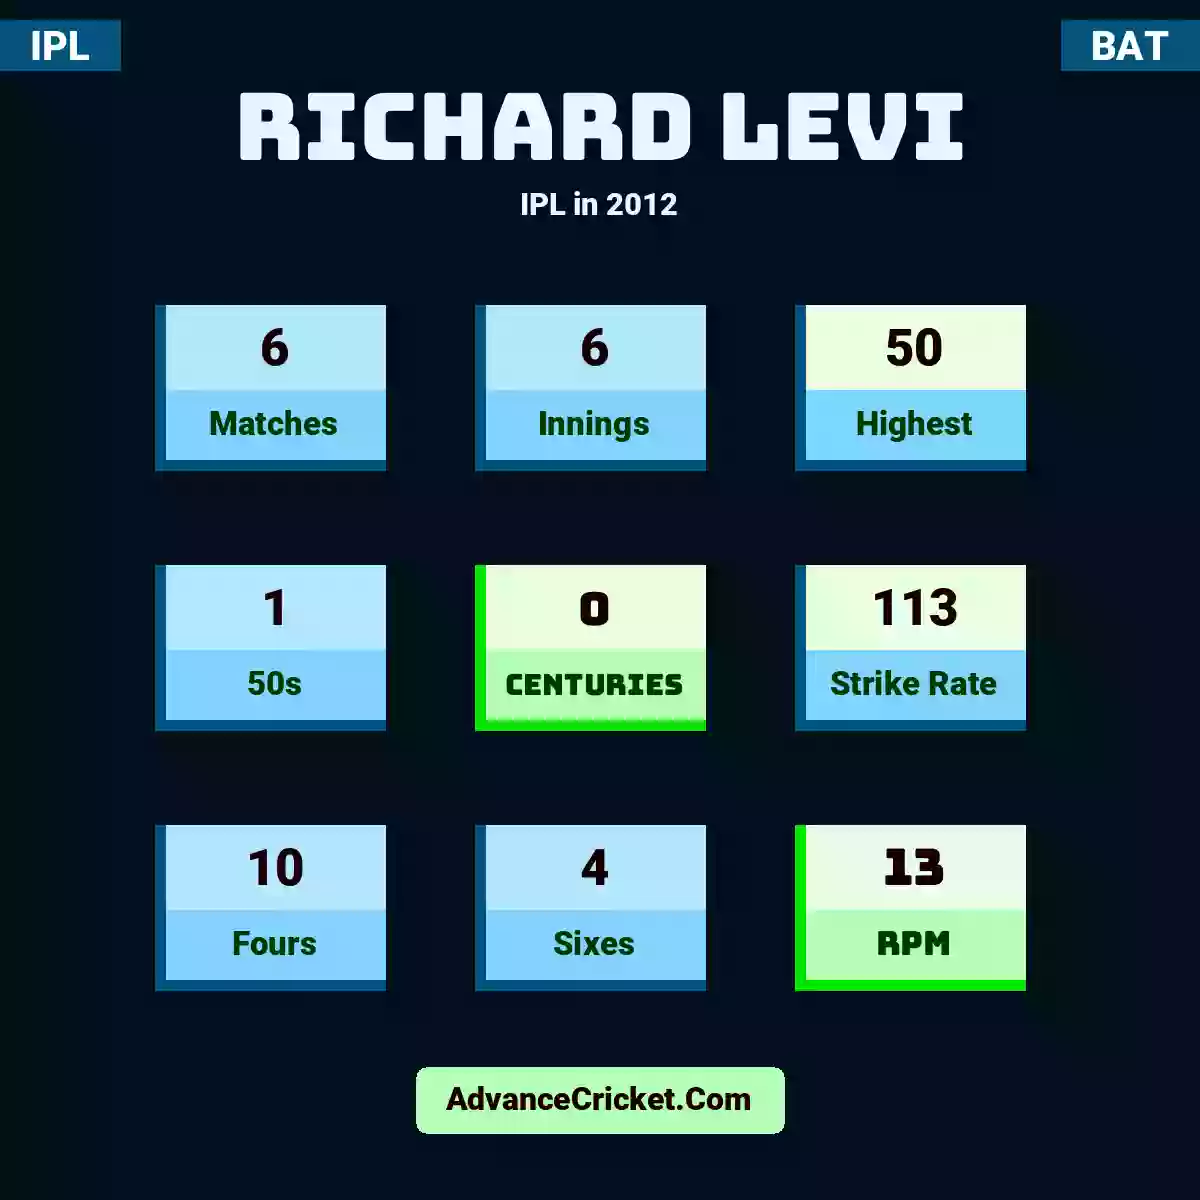 Richard Levi IPL  in 2012, Richard Levi played 6 matches, scored 50 runs as highest, 1 half-centuries, and 0 centuries, with a strike rate of 113. R.Levi hit 10 fours and 4 sixes, with an RPM of 13.